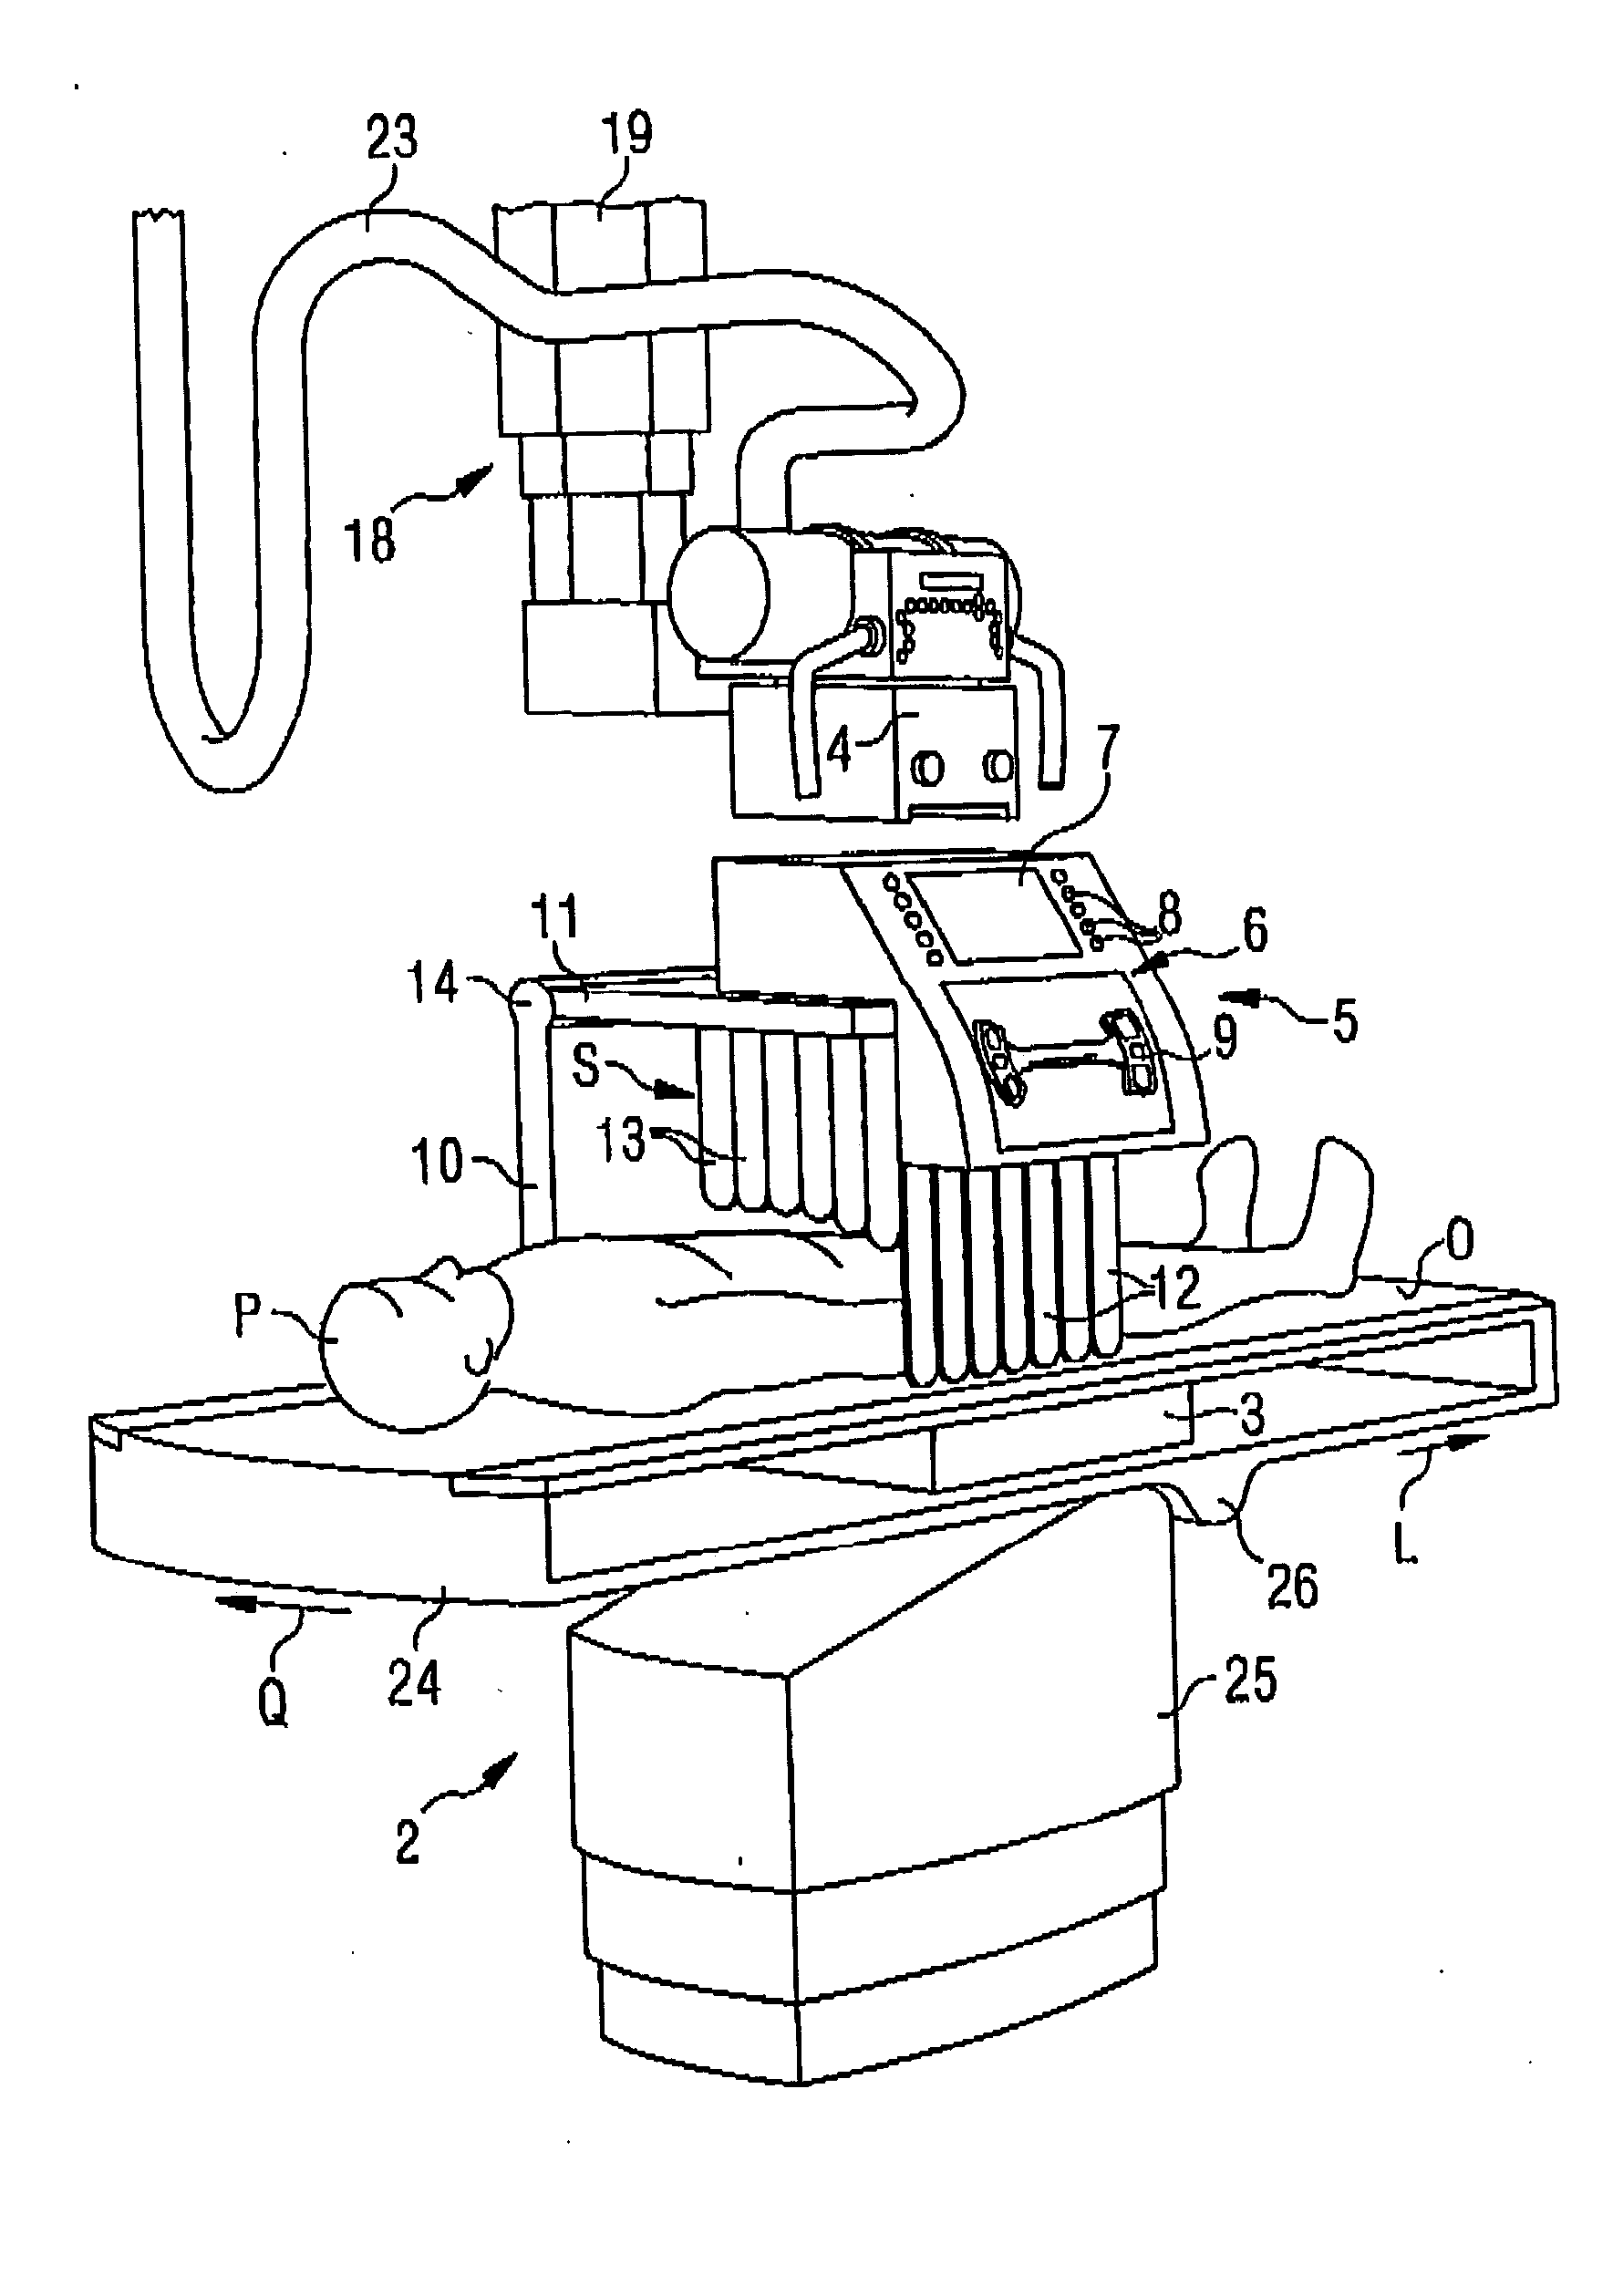 X-ray examination apparatus that is convertible among multiple examination configurations